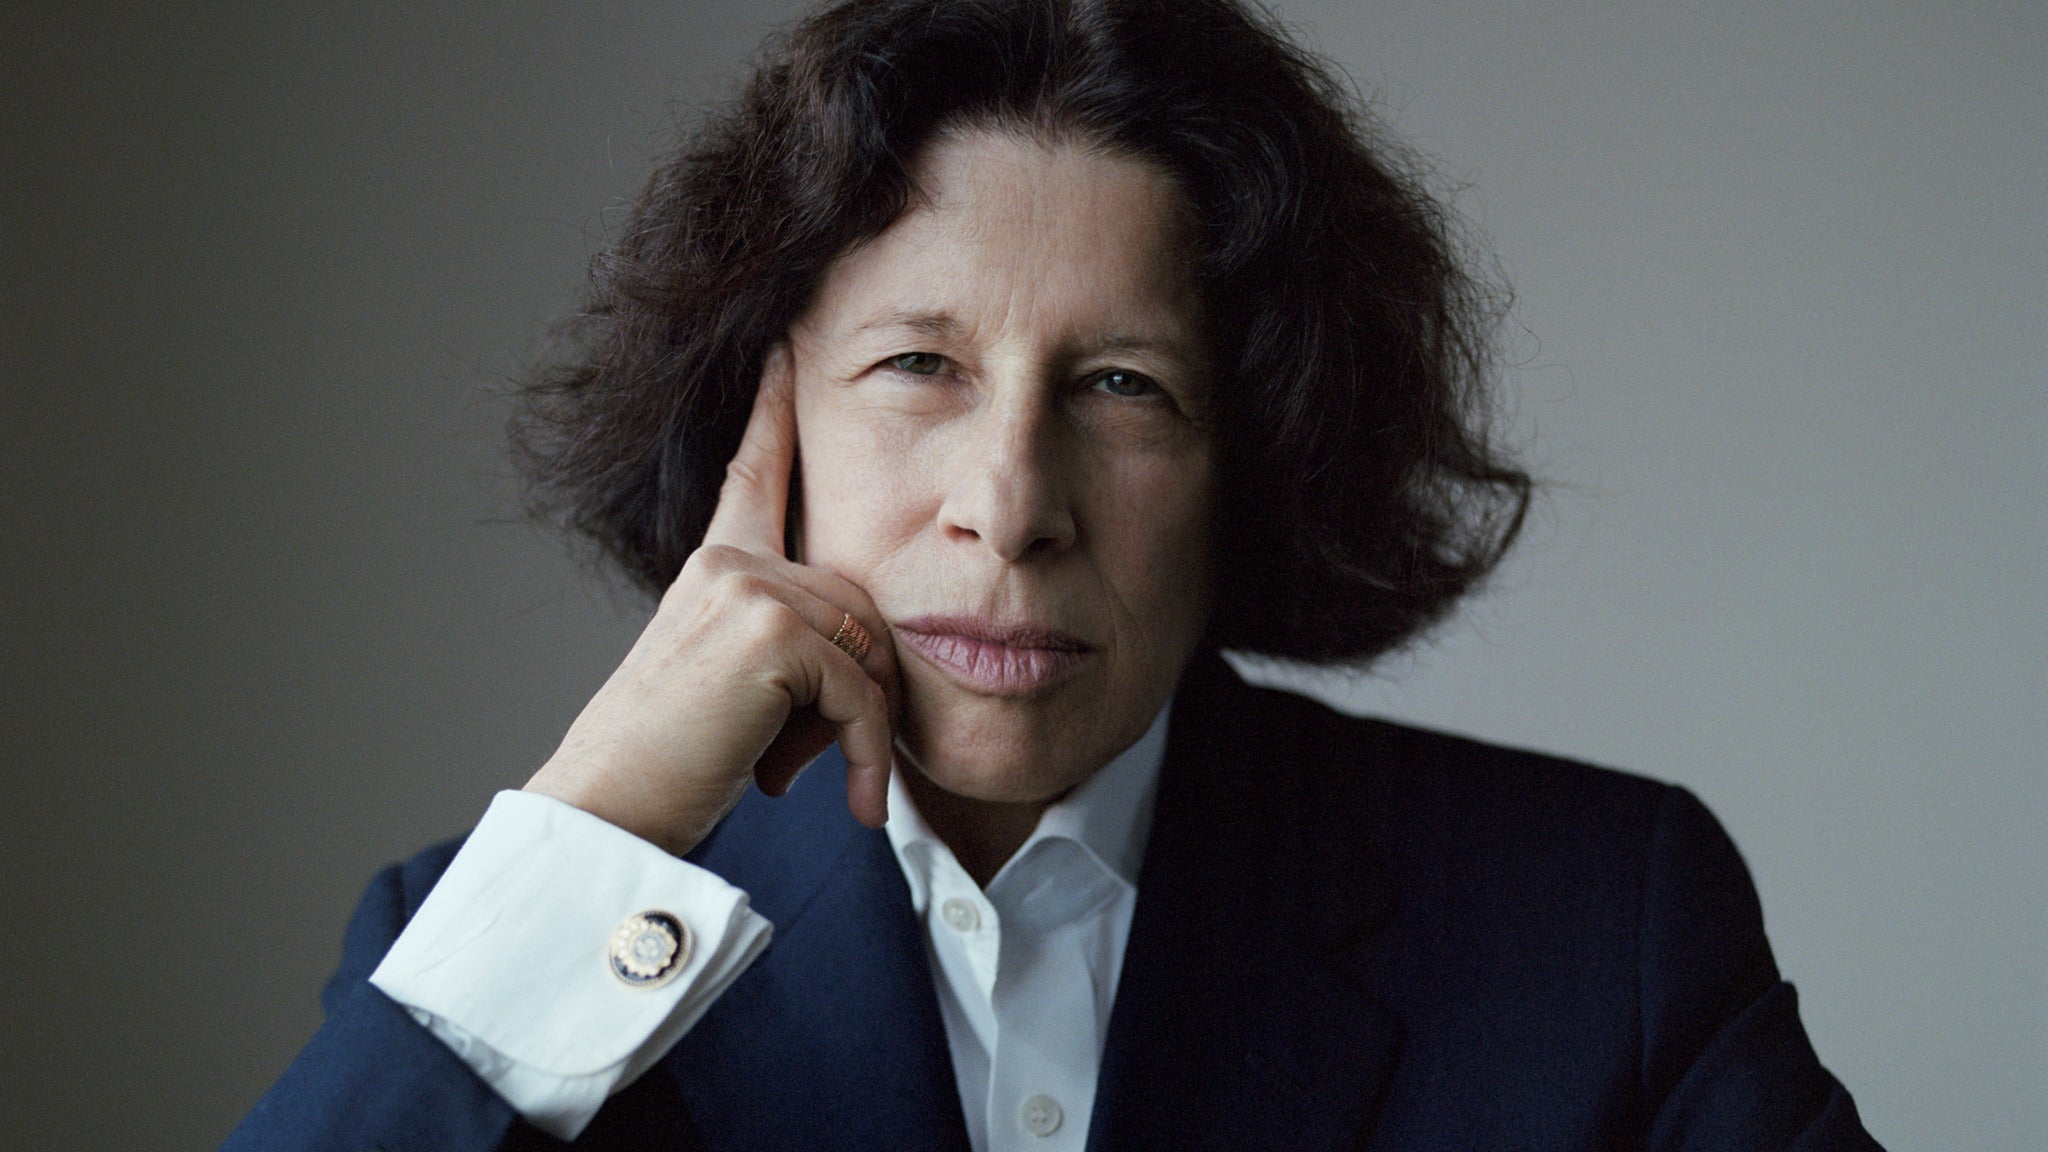 An Evening With Fran Lebowitz in Pittsburgh promo photo for Exclusive presale offer code